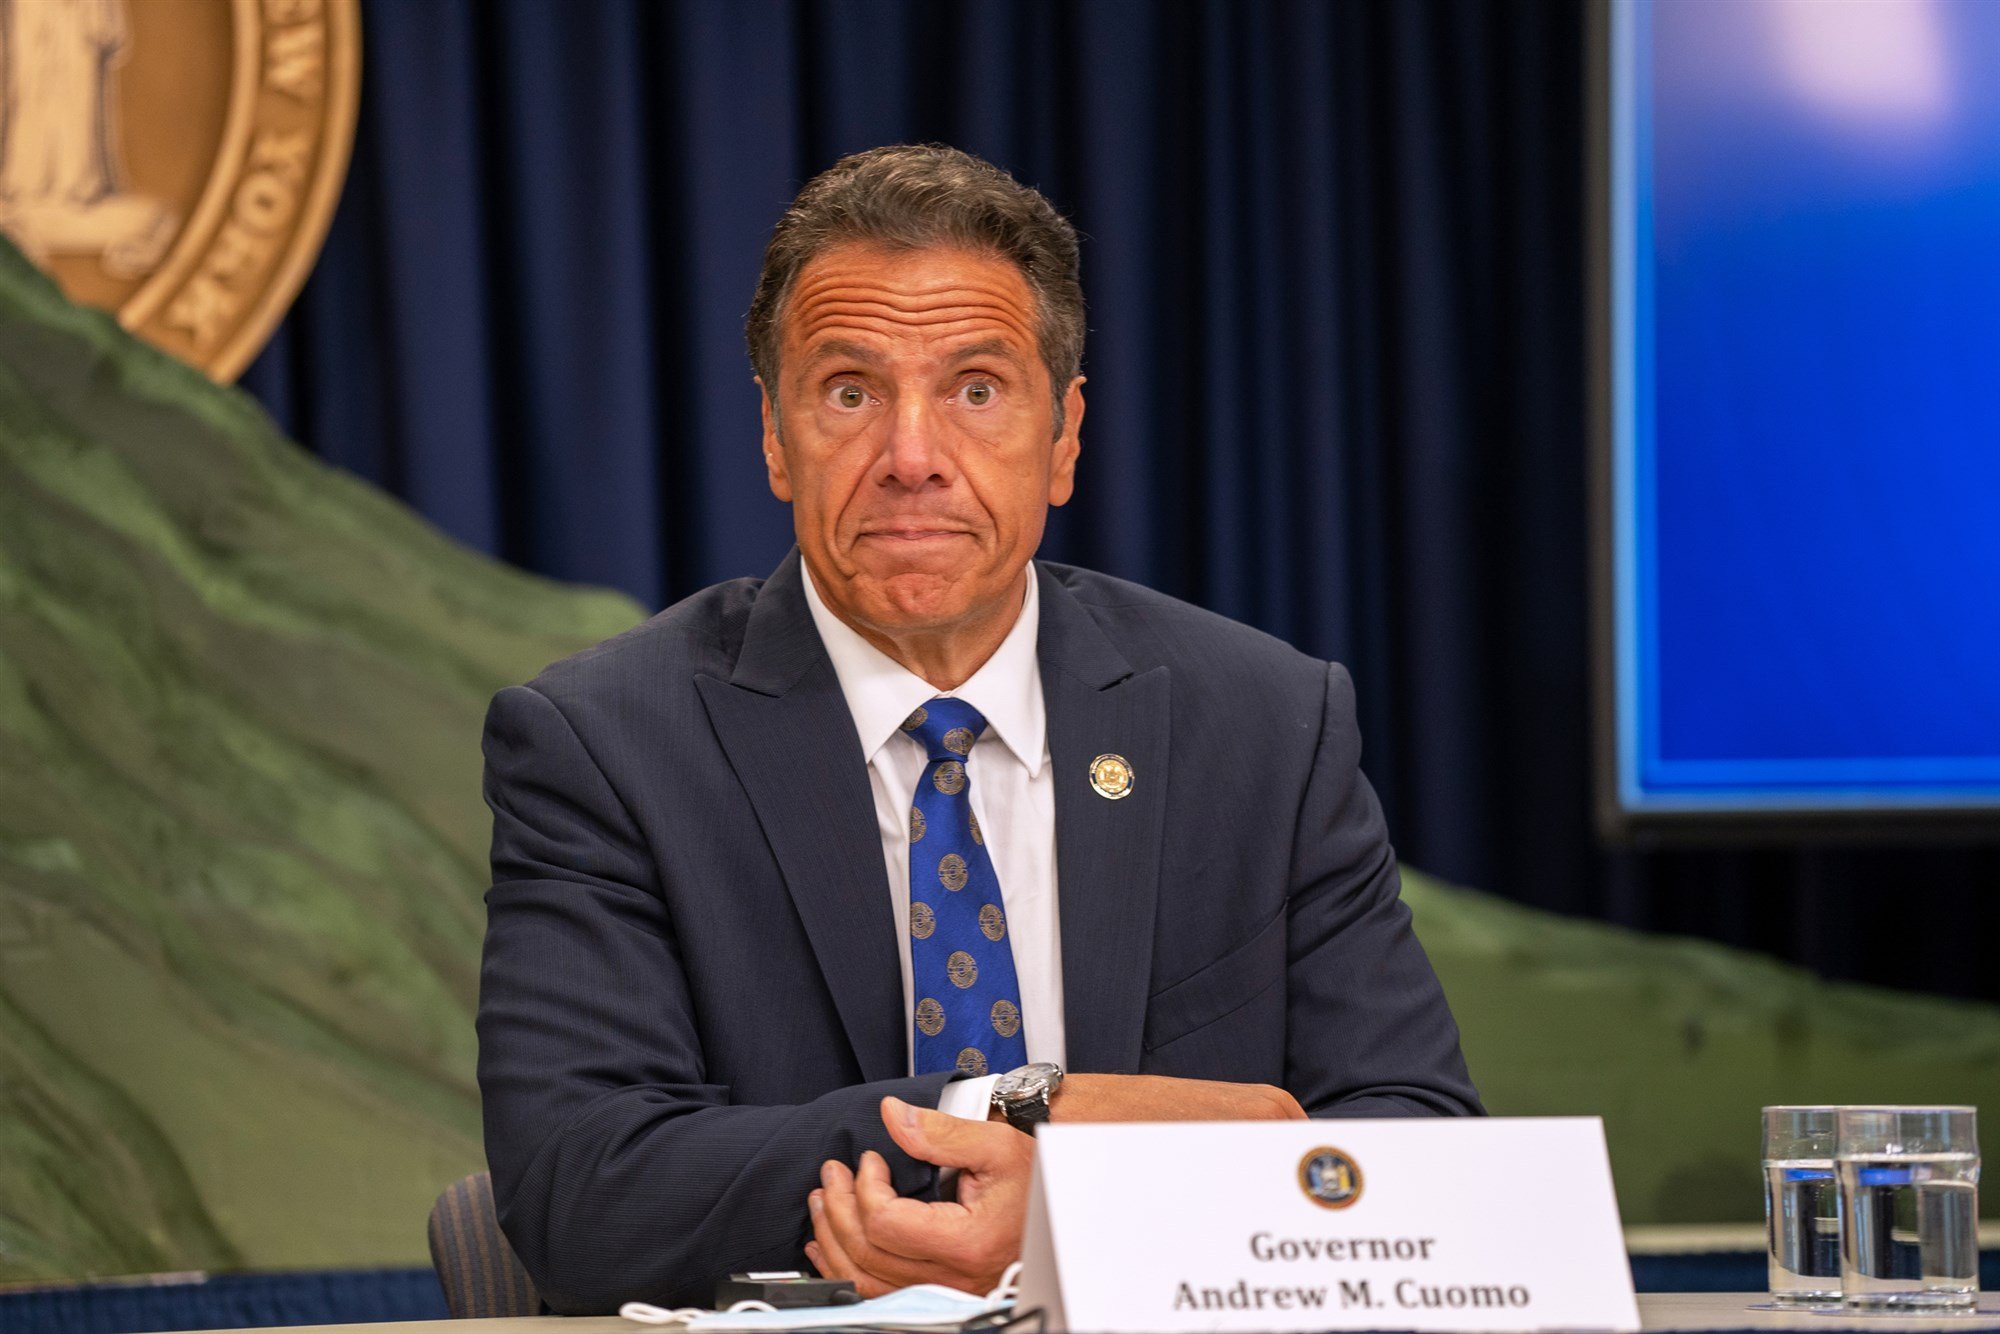 Former aide Twitter NewYork Governor Cuomo said he had been sexually harassed for many years.